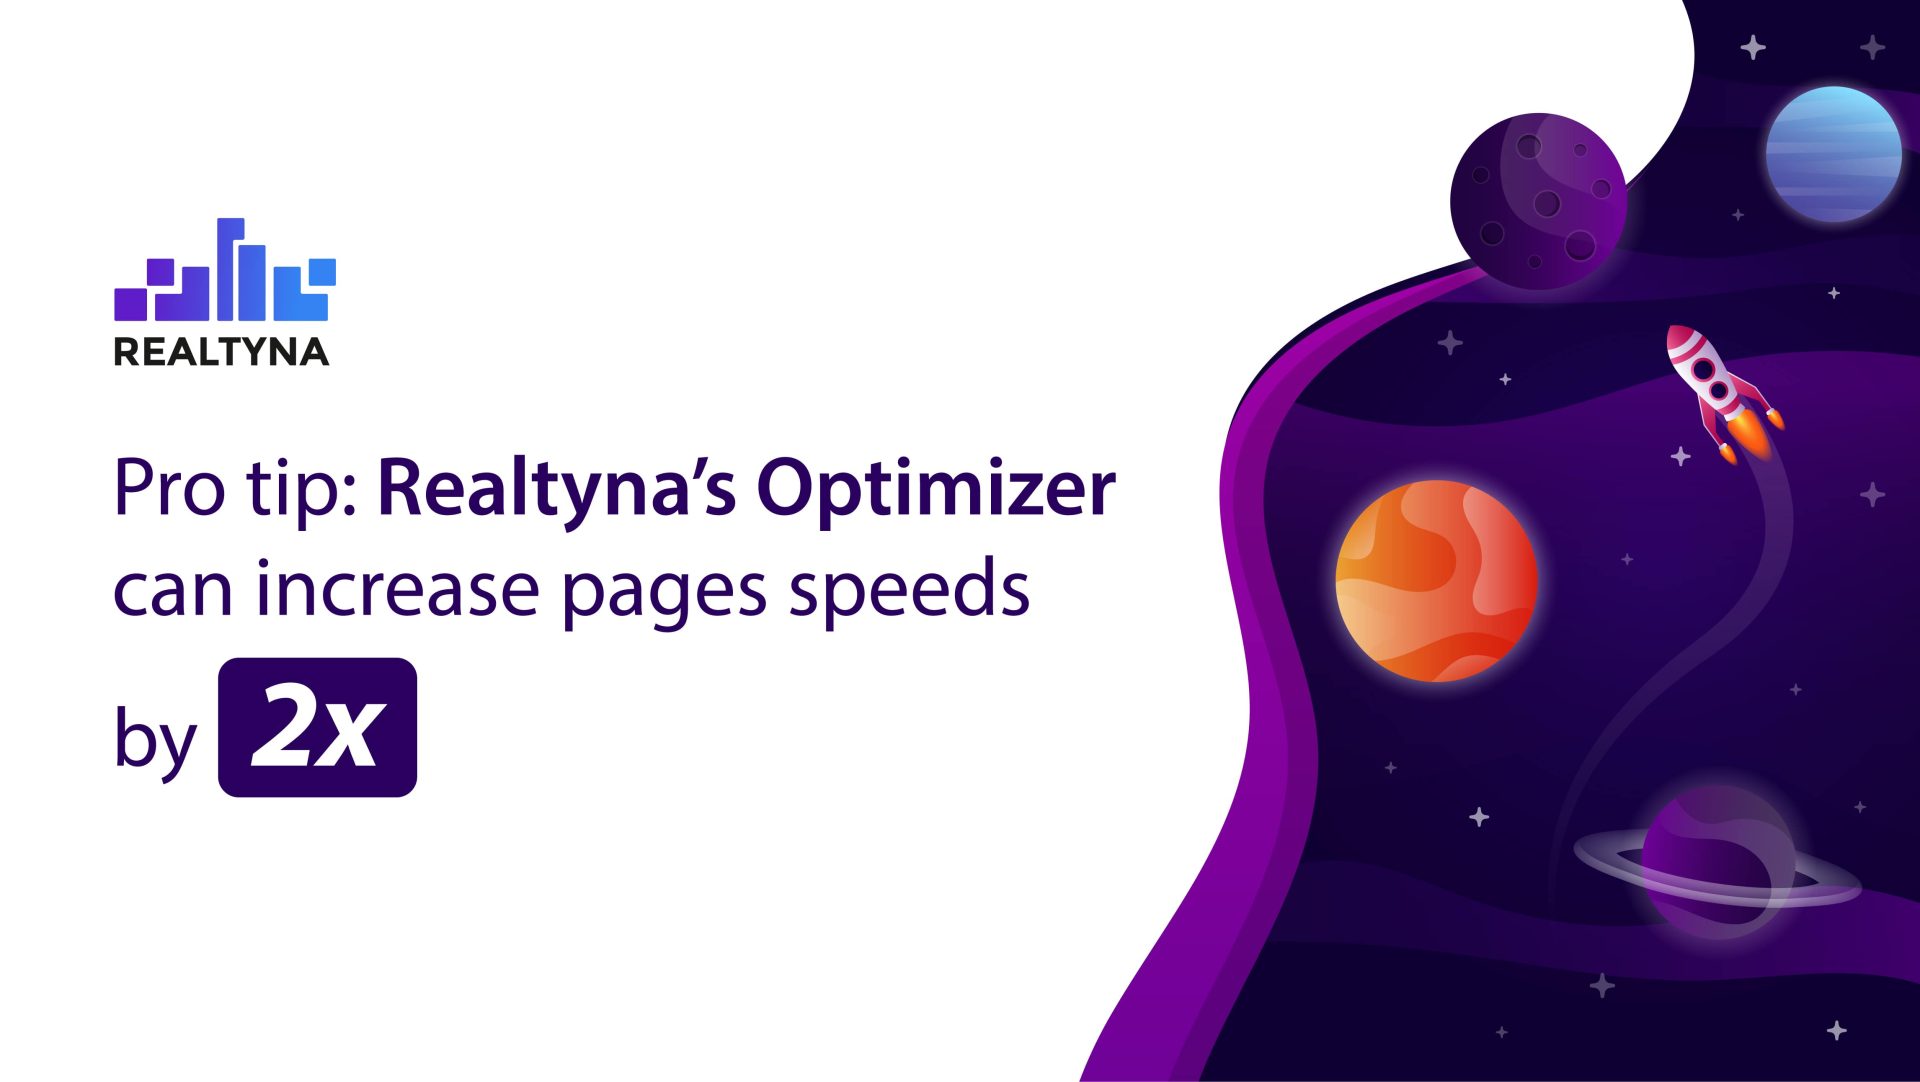 Pro Tip: Realtyna's Optimizer can increase pages speed by 2x